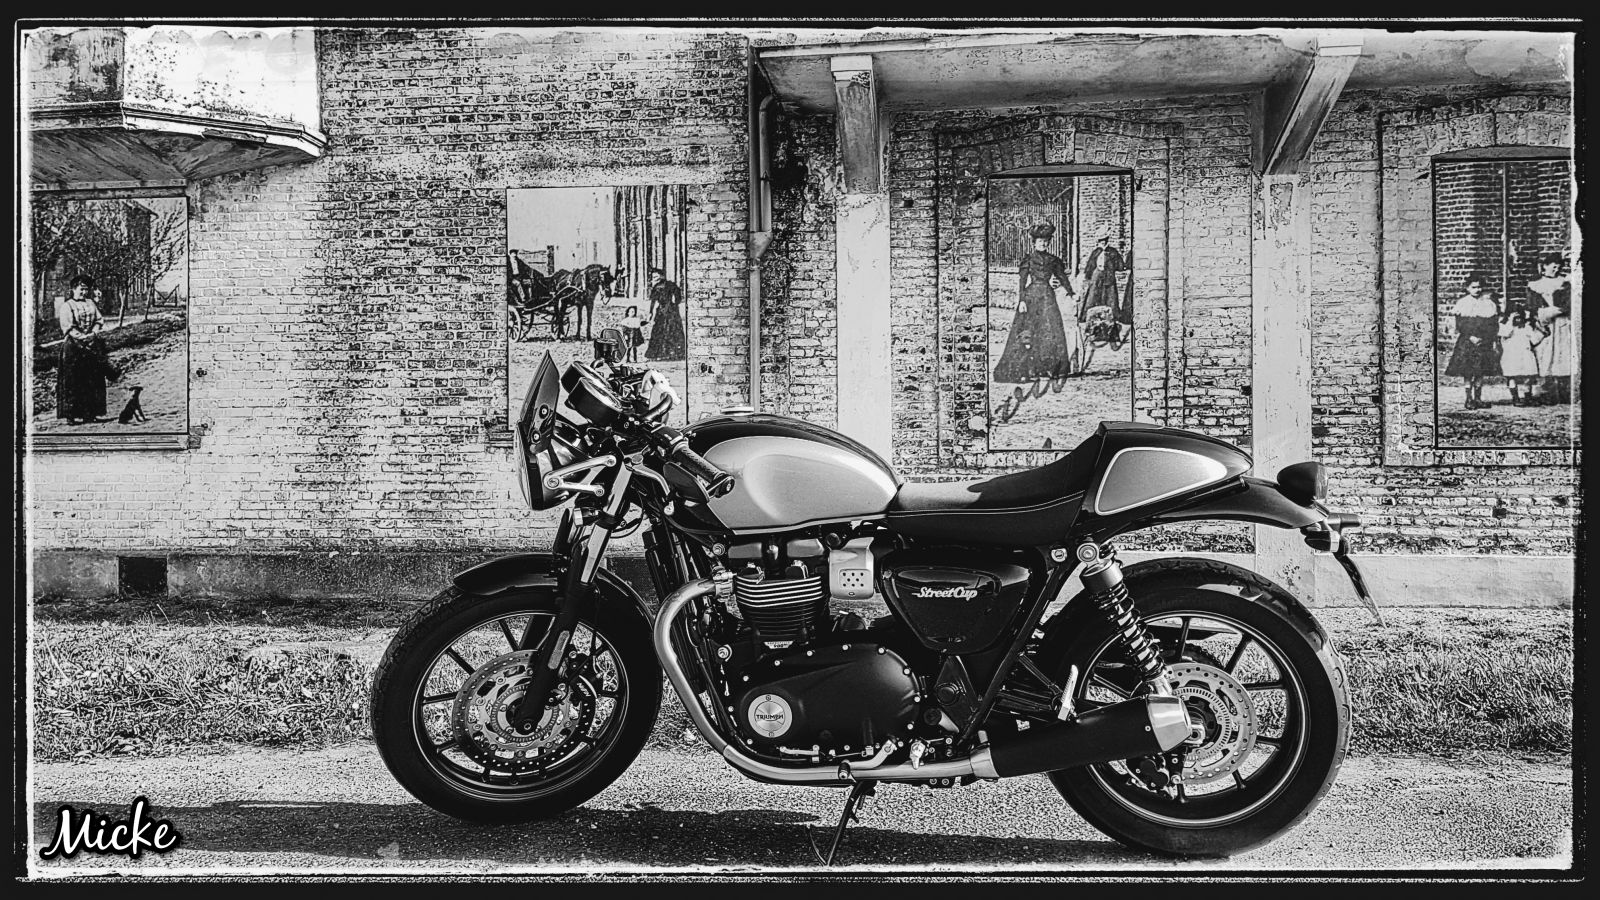 Triumph Street Cup Wallpapers